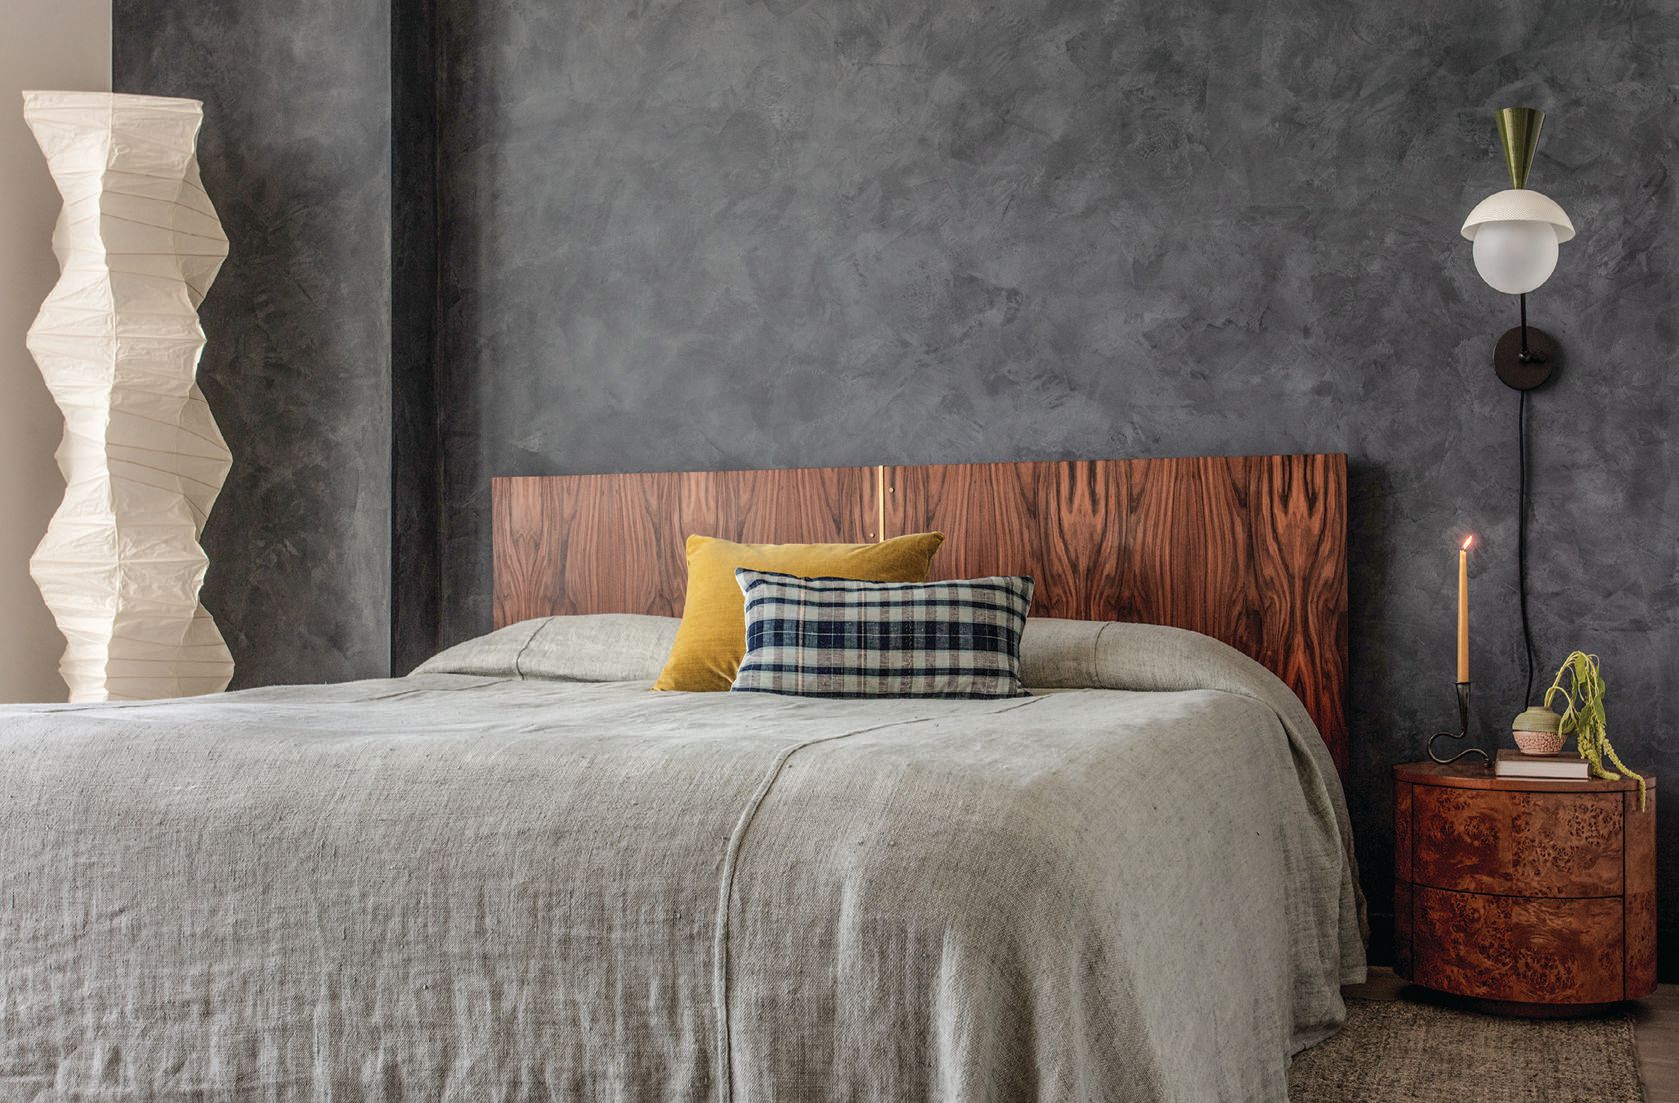 The moody bedroom features a custom bed from Hawk & Stone covered in an Enzyme linen coverlet by RW Guild.A Noguchi floor lamp complements the Molto
reading lamp sconce from Blueprint Lighting. PHOTOGRAPHED BY MICHAEL CLIFFORD